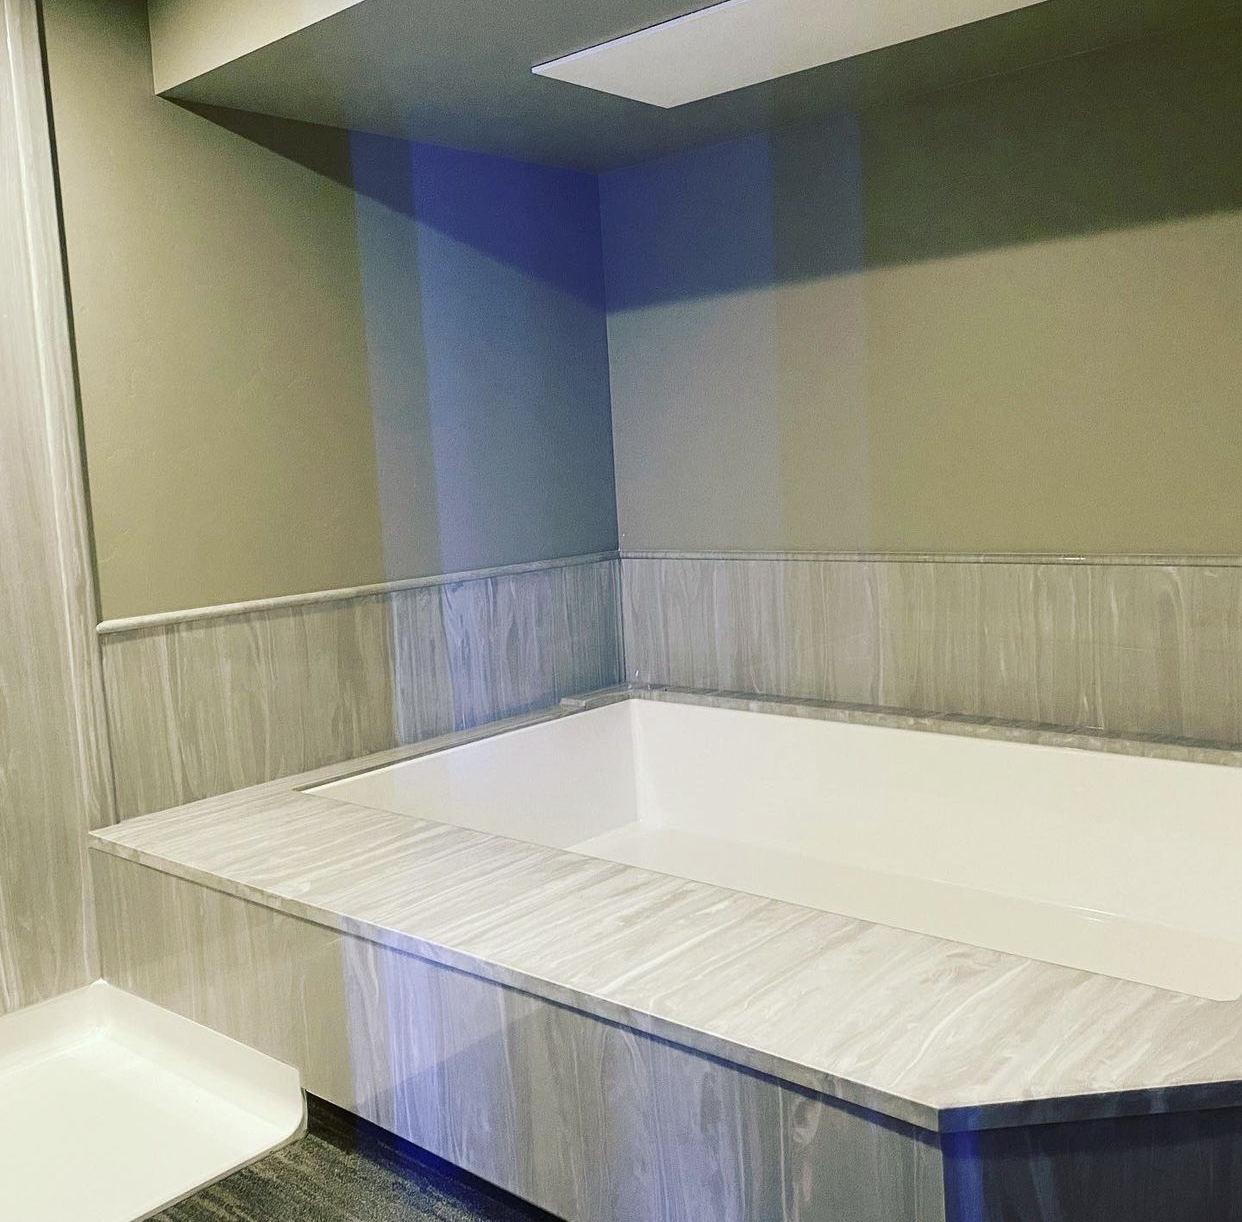 Shoshone Open Float is our ADA accessible float room that features an open, pool-like experience within a private room for flotation therapy